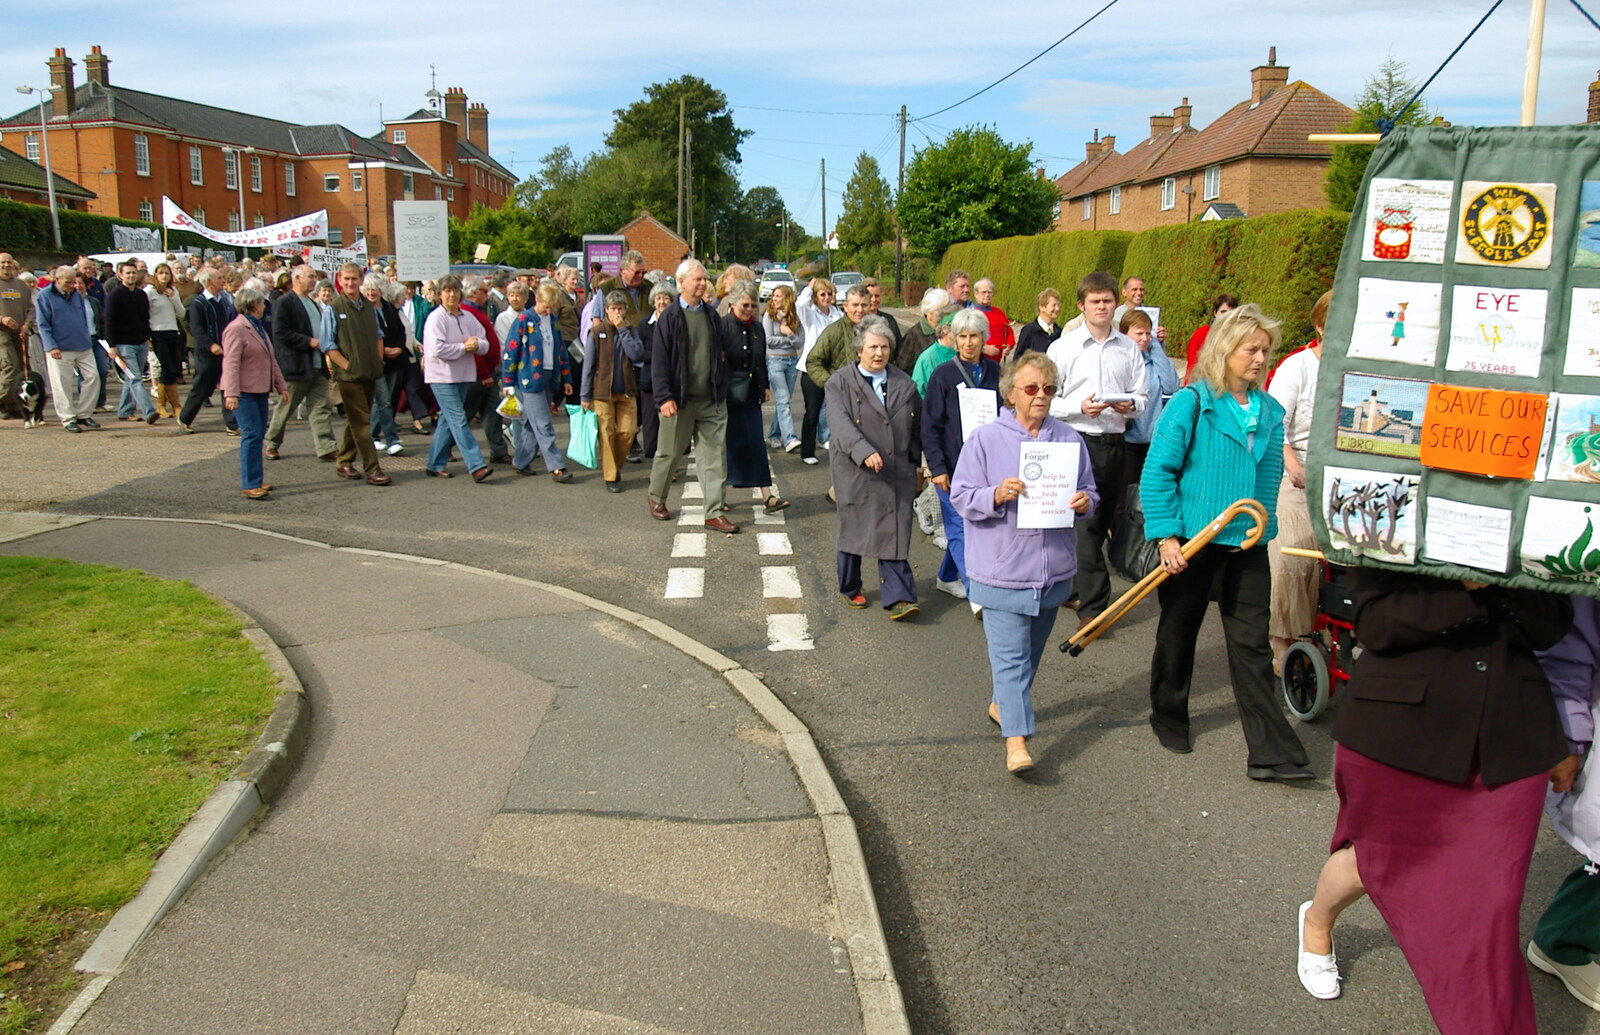 The crowd leaves the hospital from Save Hartismere: a Hospital Closure Protest, Eye, Suffolk - 17th September 2005